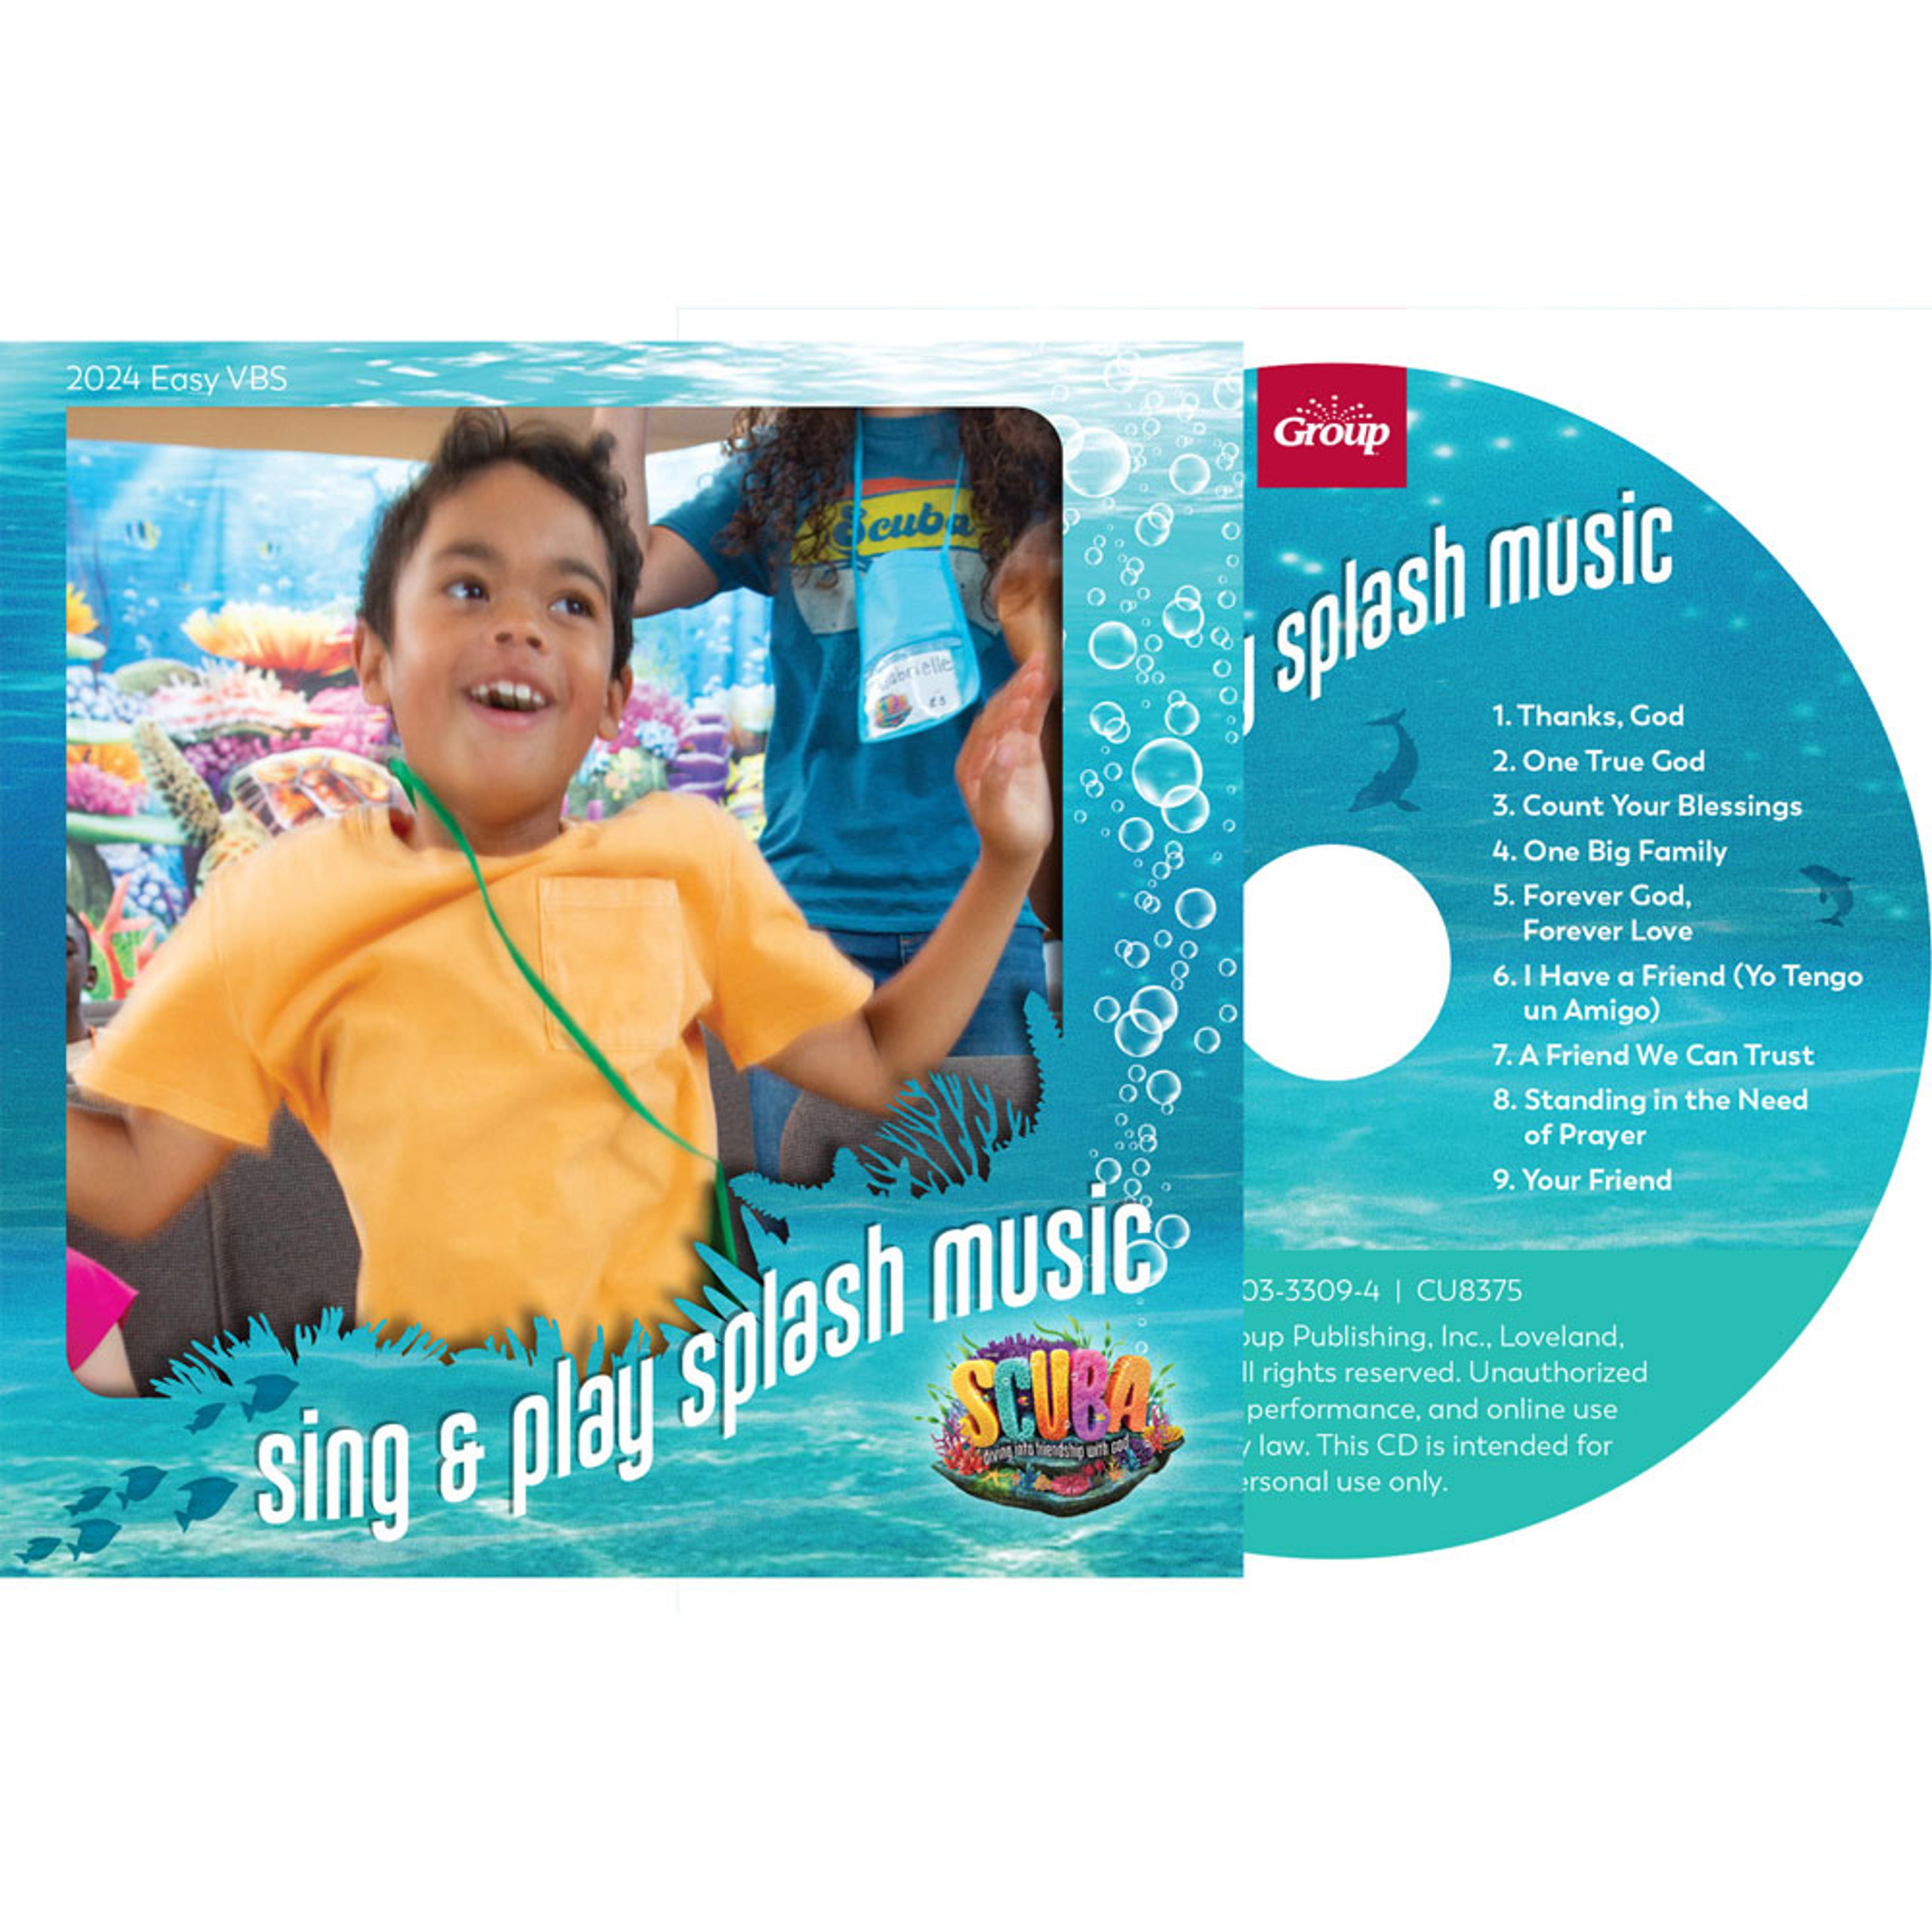 Scuba Music TakeHome CD Scuba VBS 2024 by Group Concordia Supply